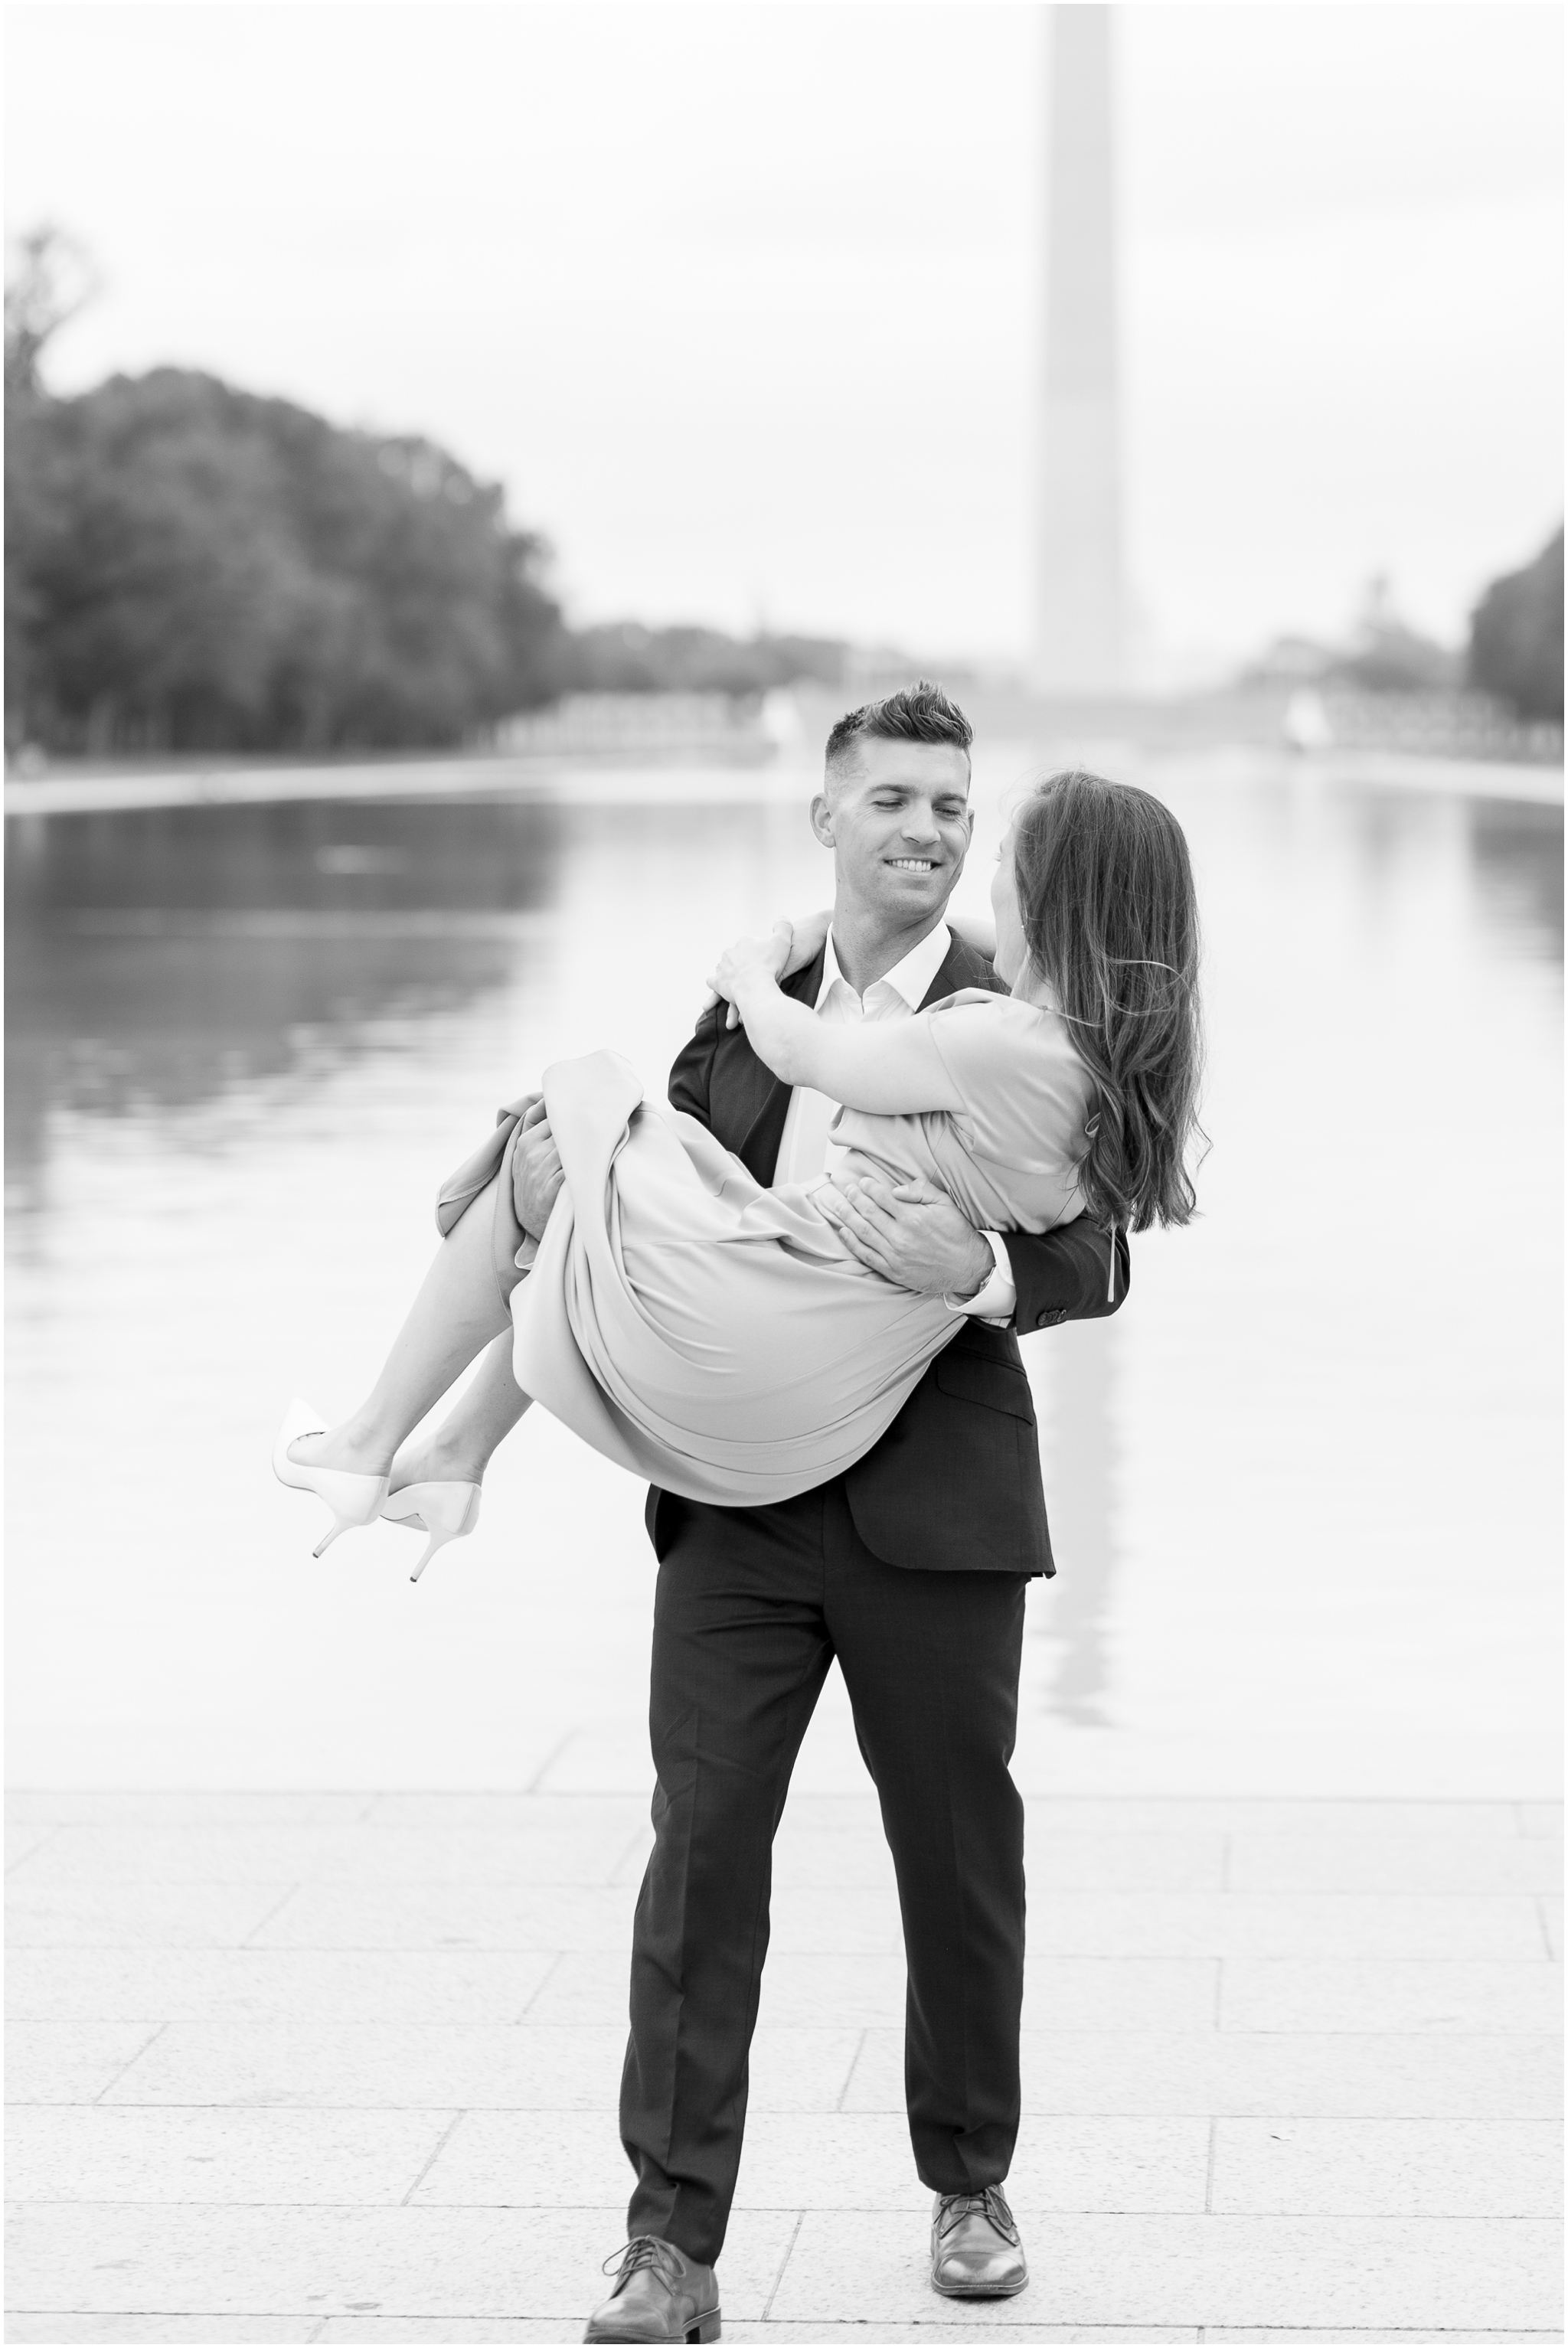 DC Wedding photographer captured a sunrise Lincoln Memorial engagement session views of the Washington Monument. This formal DC engagement session at the DC monuments was captured by DC engagement photographer Taylor Rose Photography. Kate’s engagement session outfit inspiration came from Gal Meets Glam.